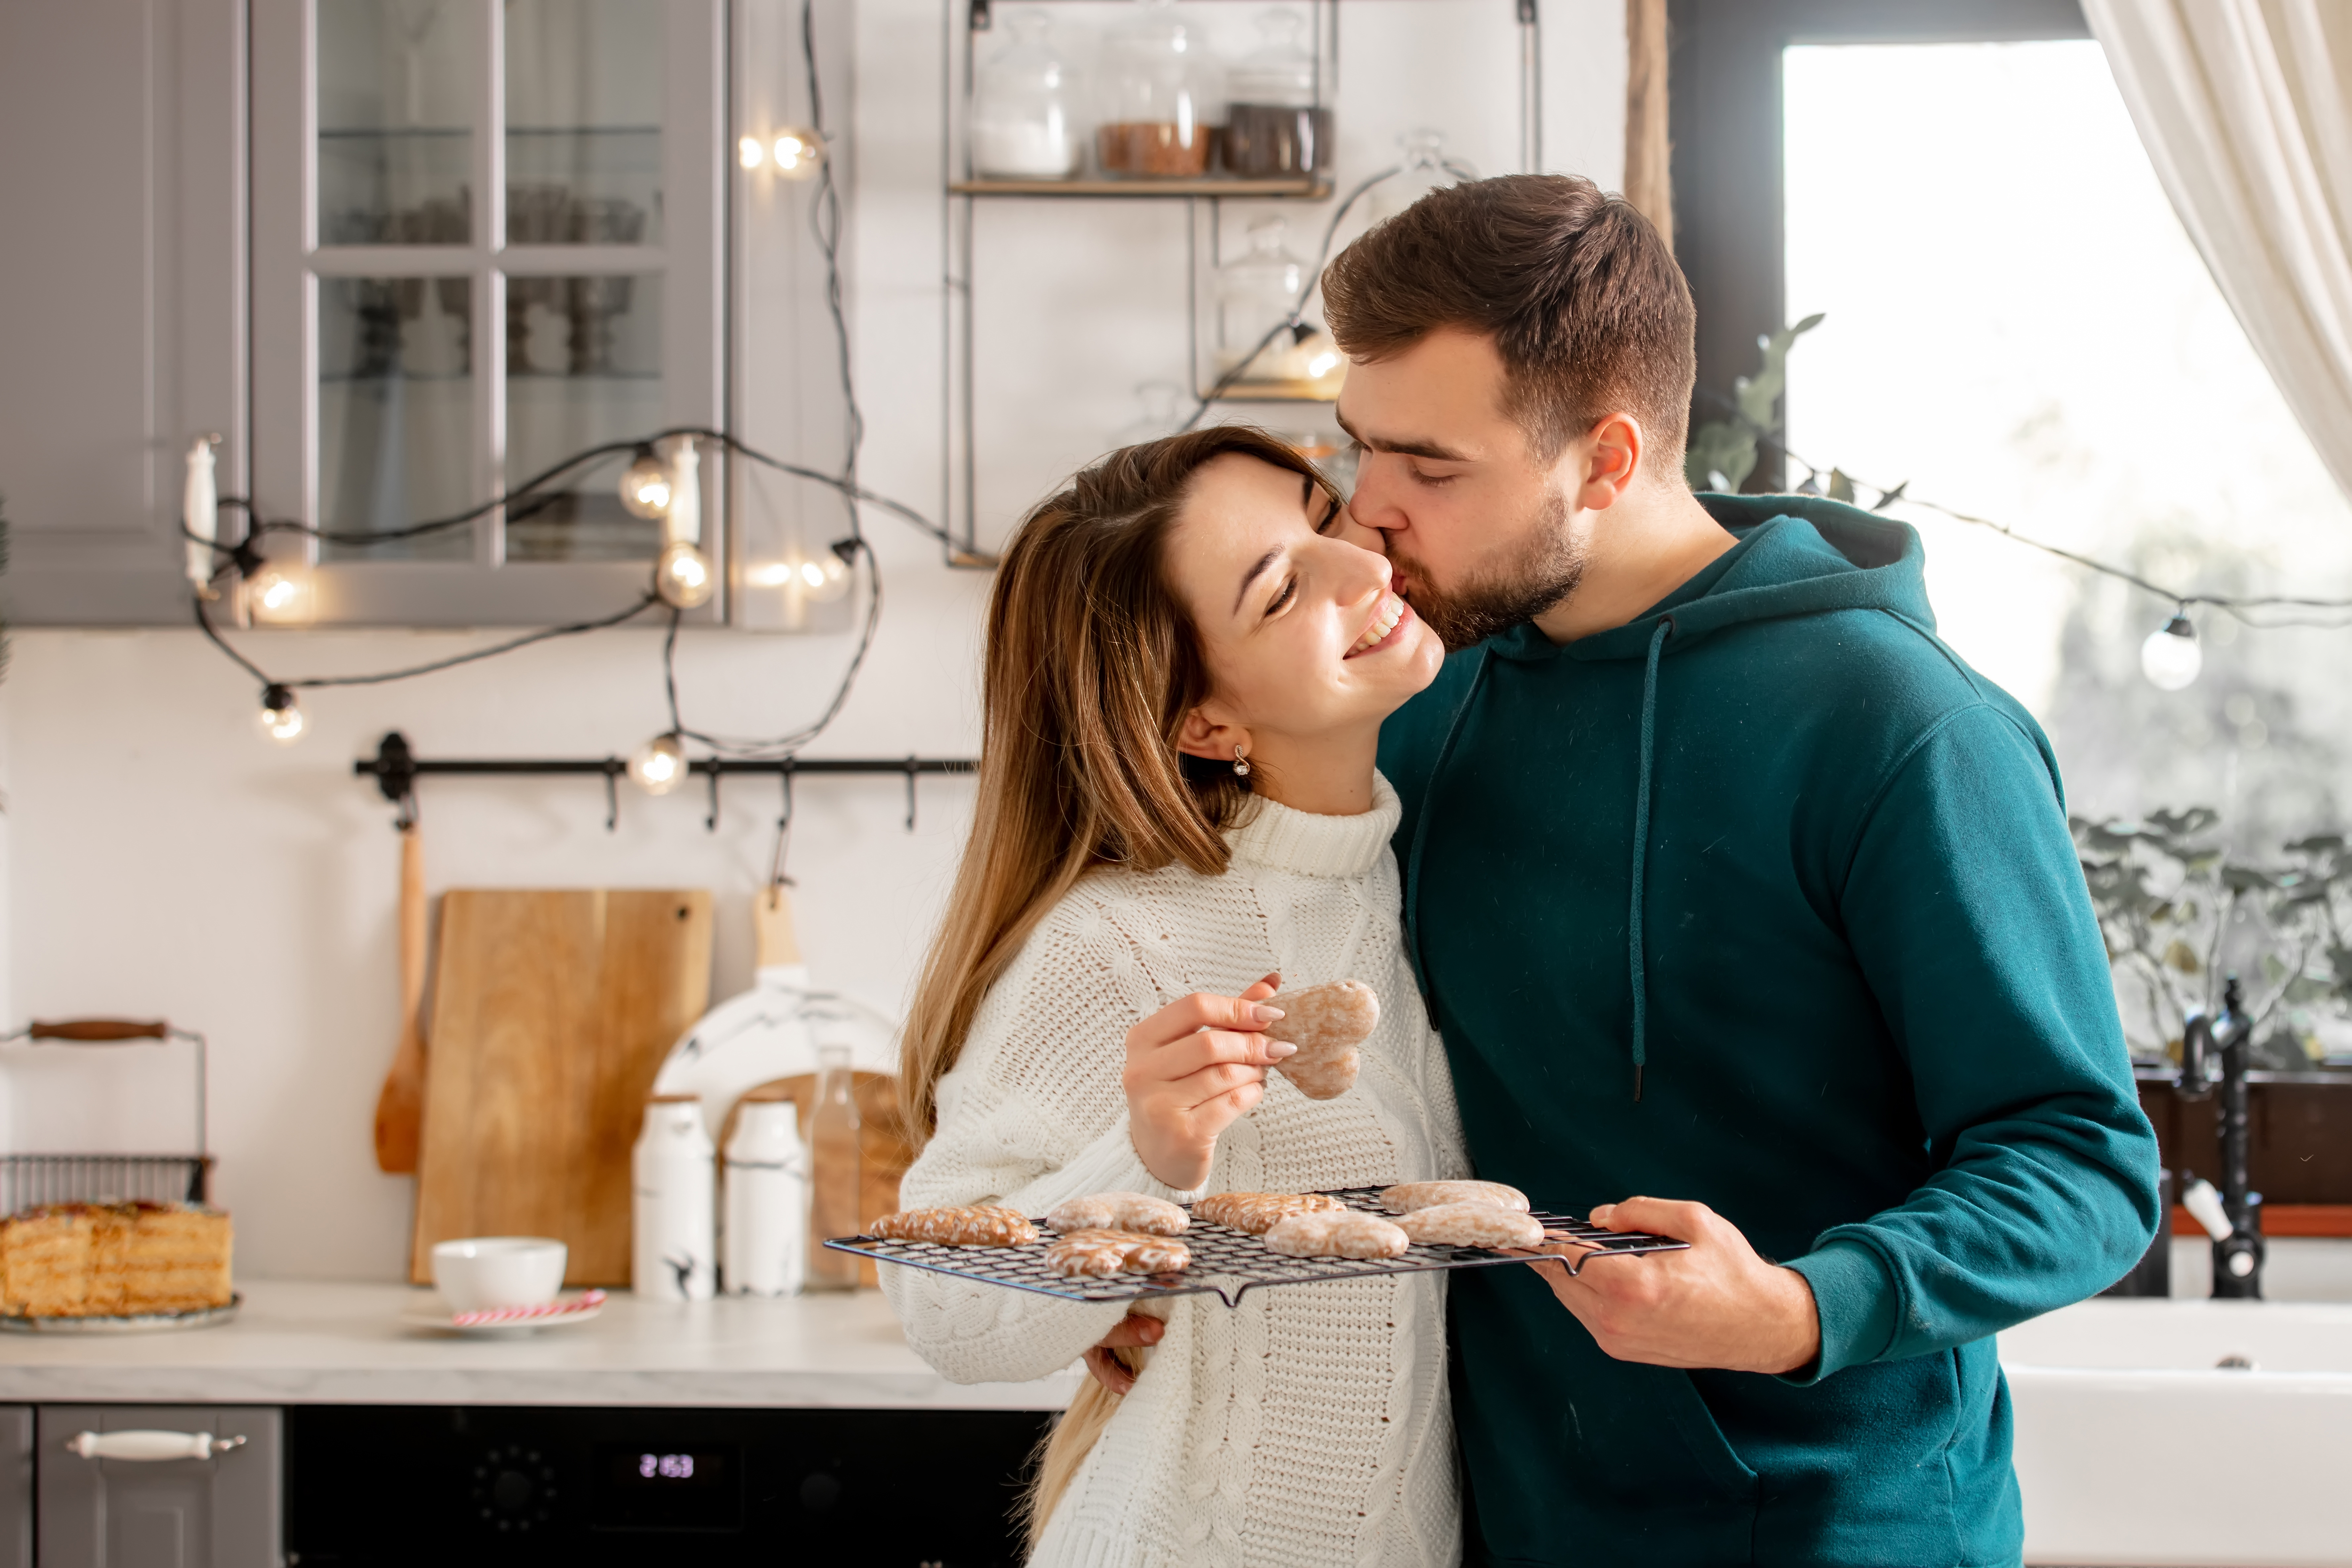 A husband kisses his wife while they bake cookies | Source: Shutterstock